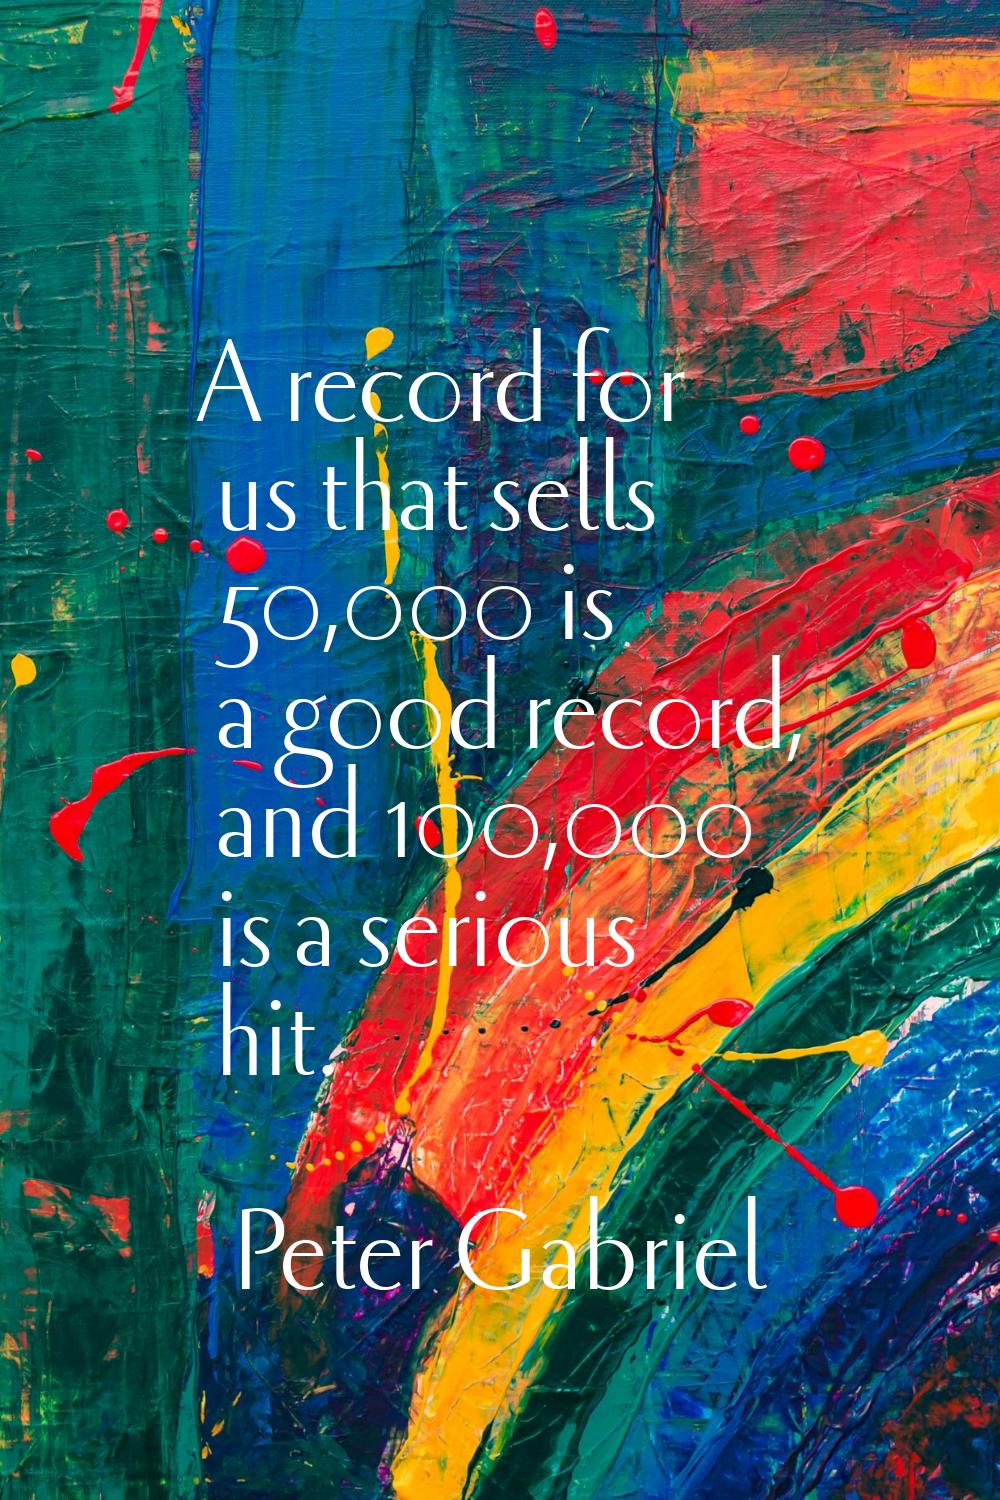 A record for us that sells 50,000 is a good record, and 100,000 is a serious hit.